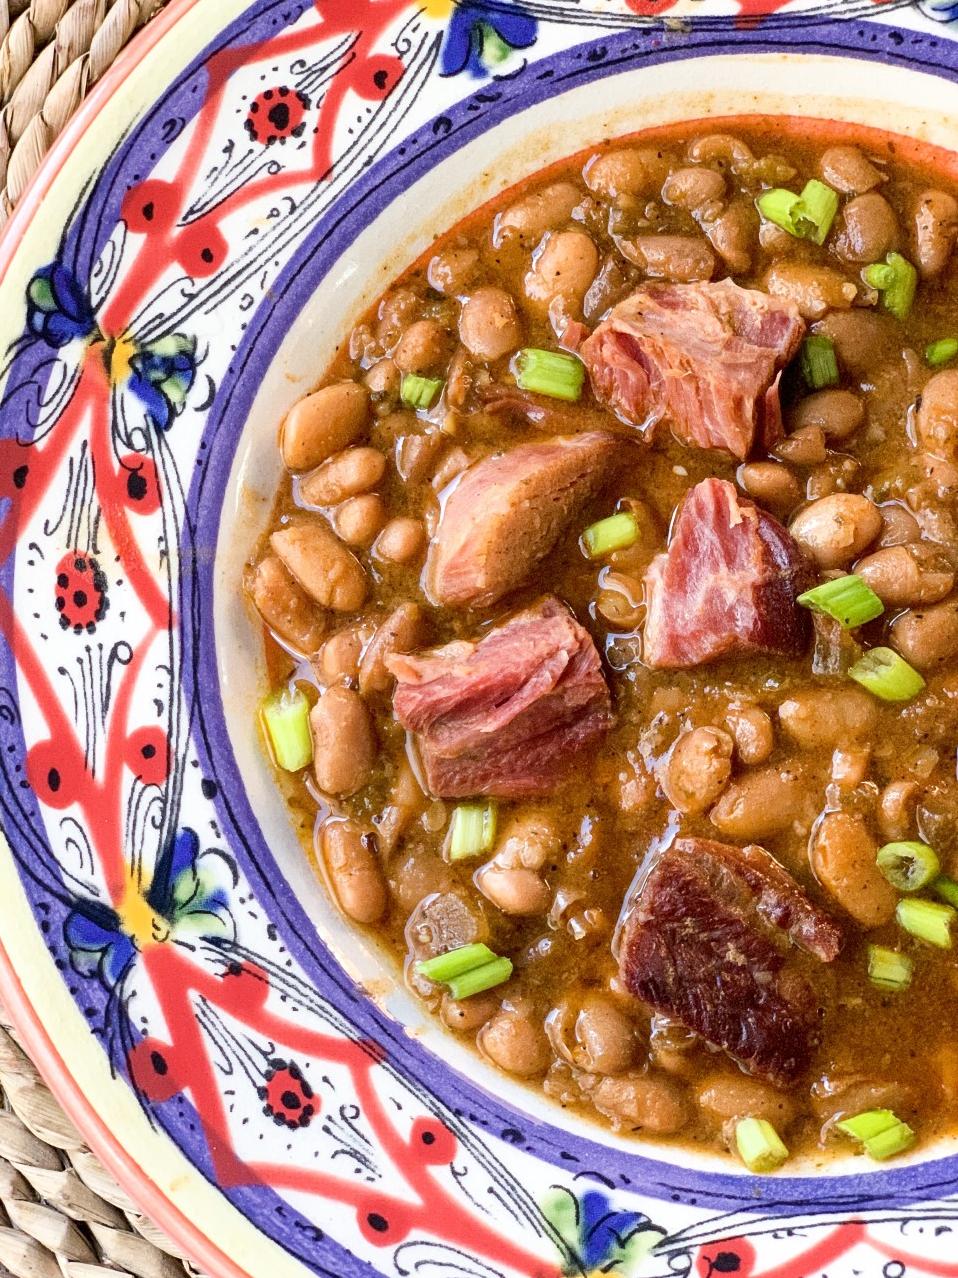  A classic Southern comfort: Pinto beans and ham hocks